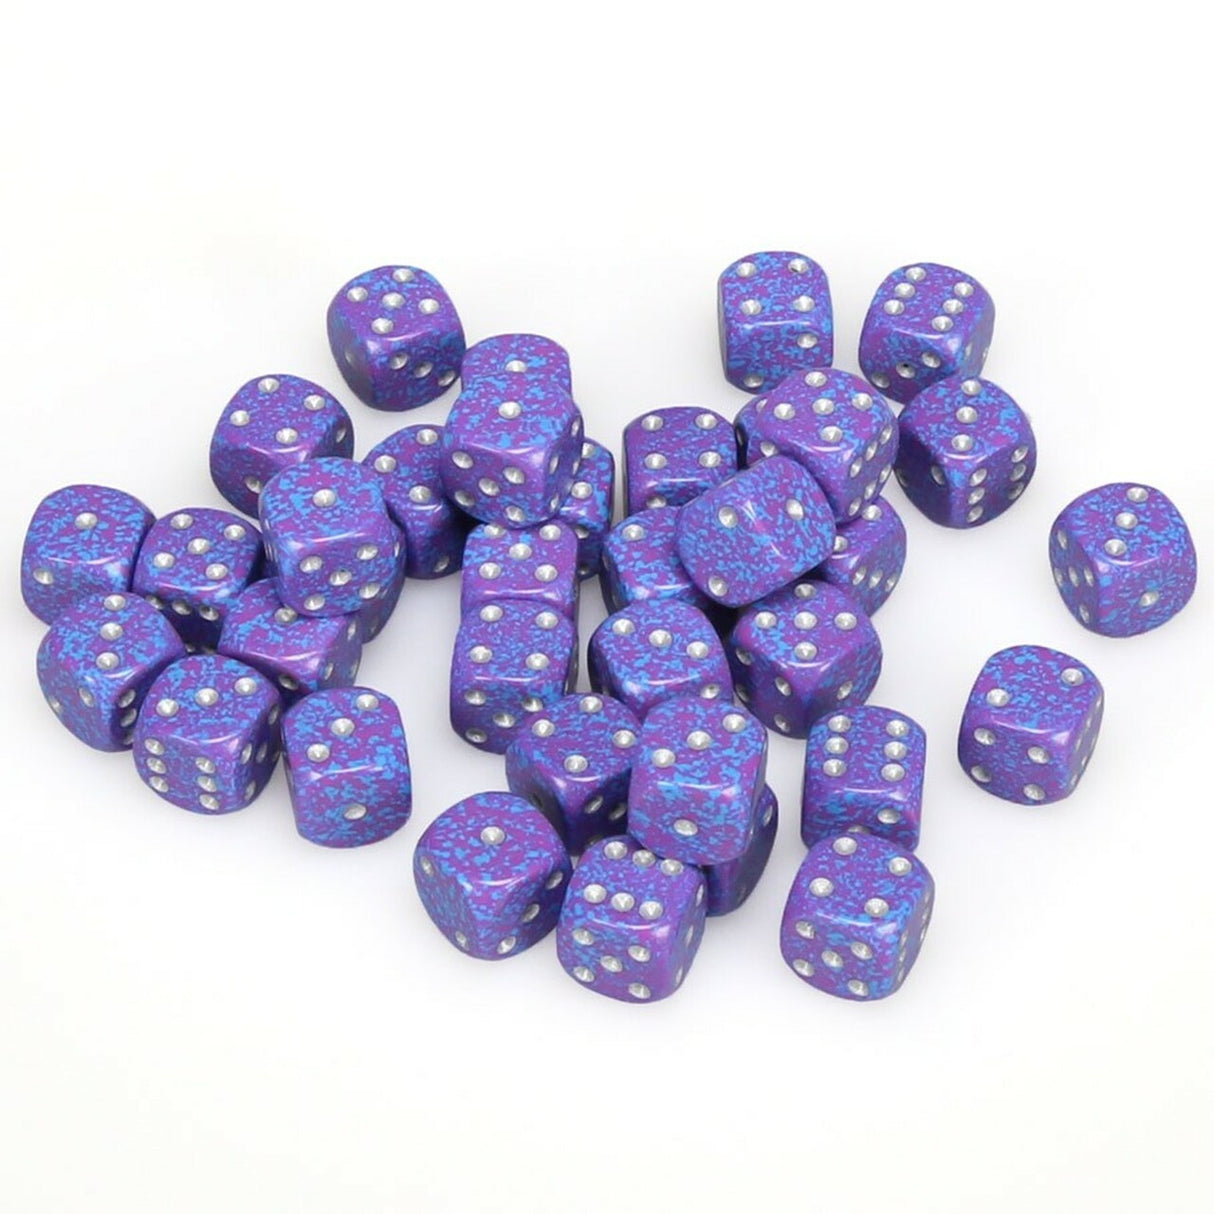 Speckled – 12mm d6 Silver Tetra™ Dice Block™